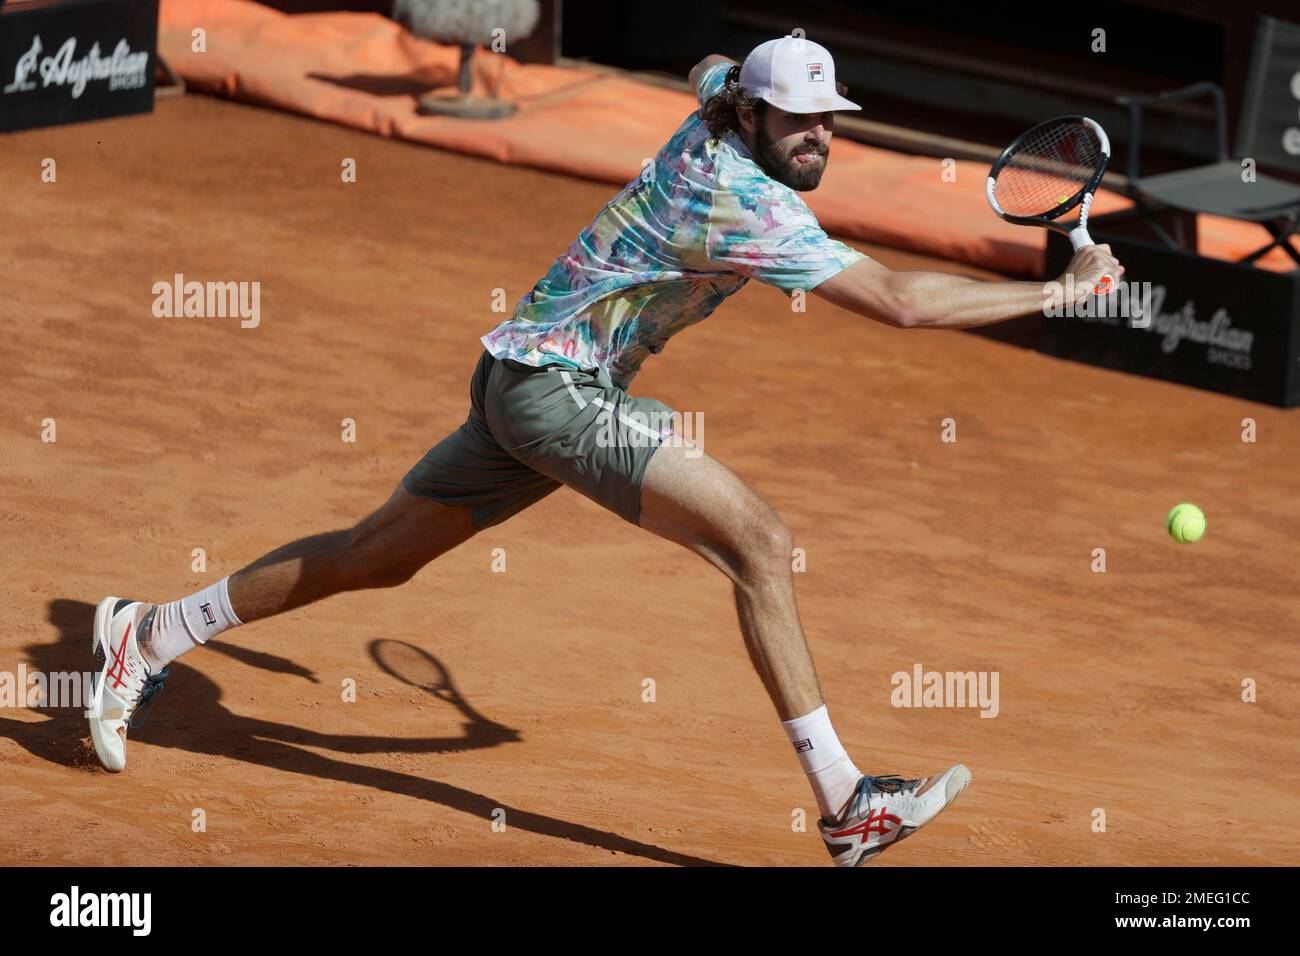 United States Reiley Opelka returns the ball to Spains Rafael Nadal during their semi-final match at the Italian Open tennis tournament, in Rome, Saturday, May 15, 2021